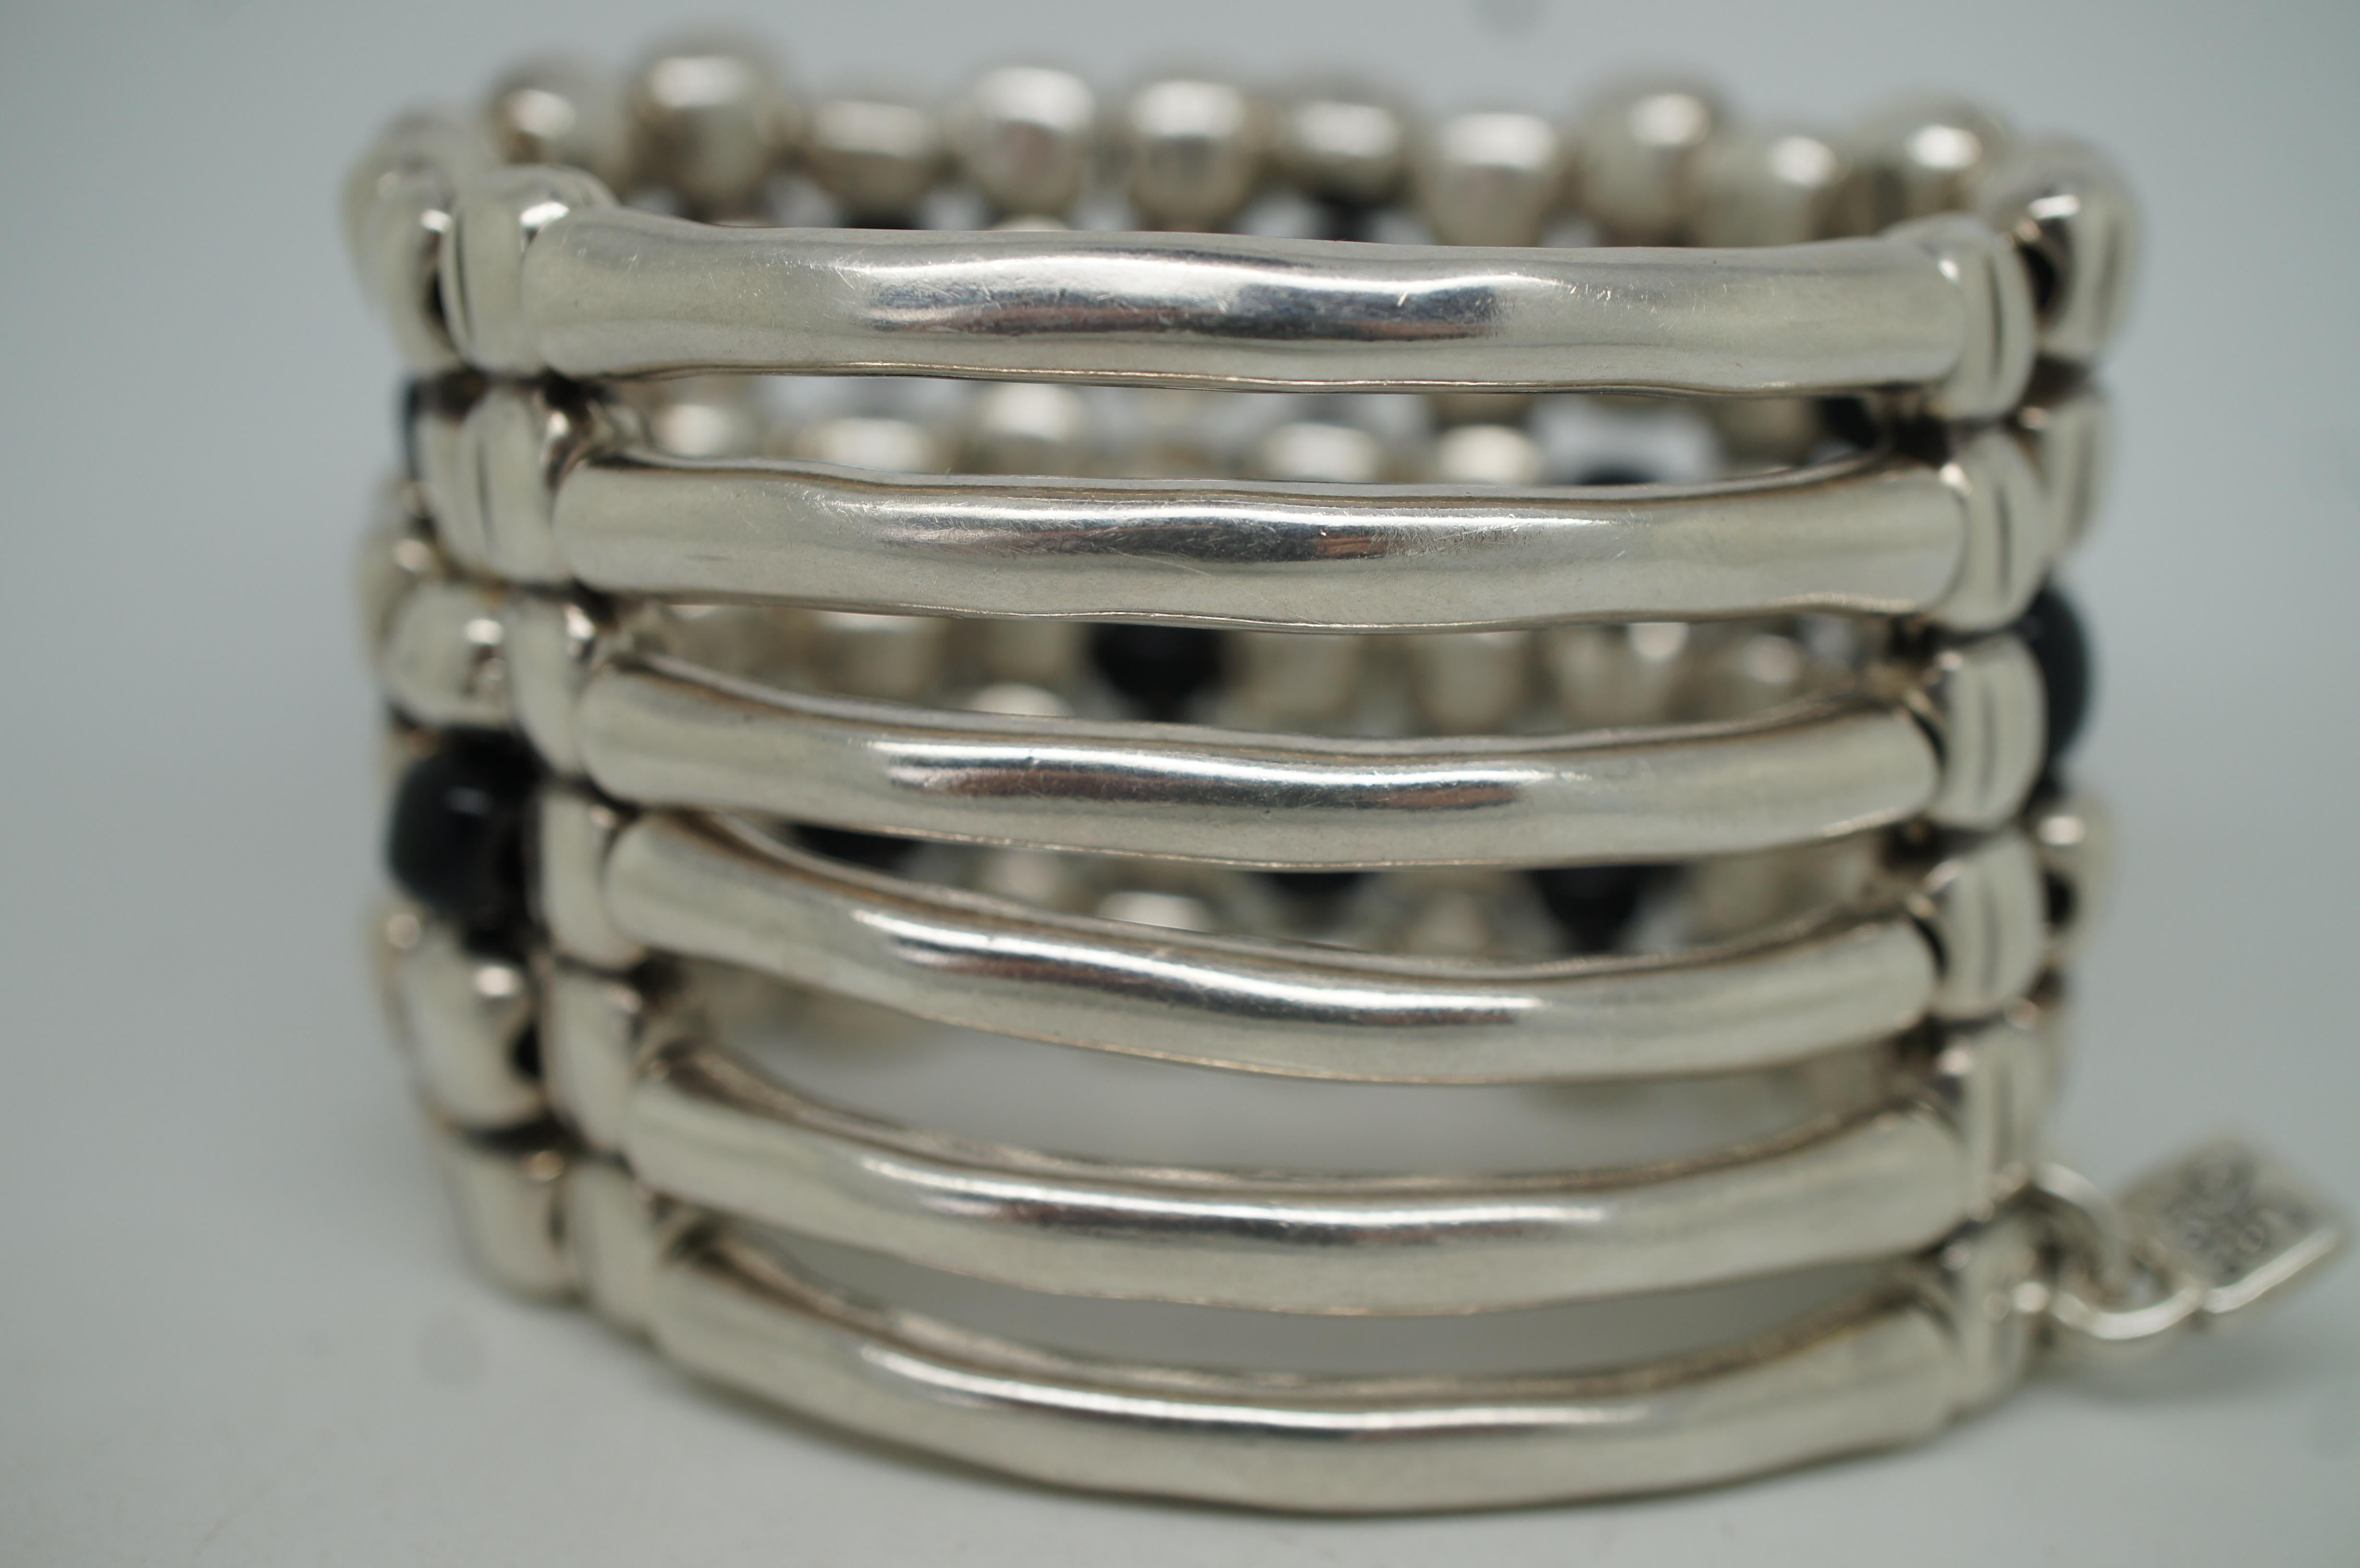 Vintage Uno De 50 Silver & Black Wide Beaded Stretch Cuff Bracelet Bangle In Good Condition For Sale In Dayton, OH